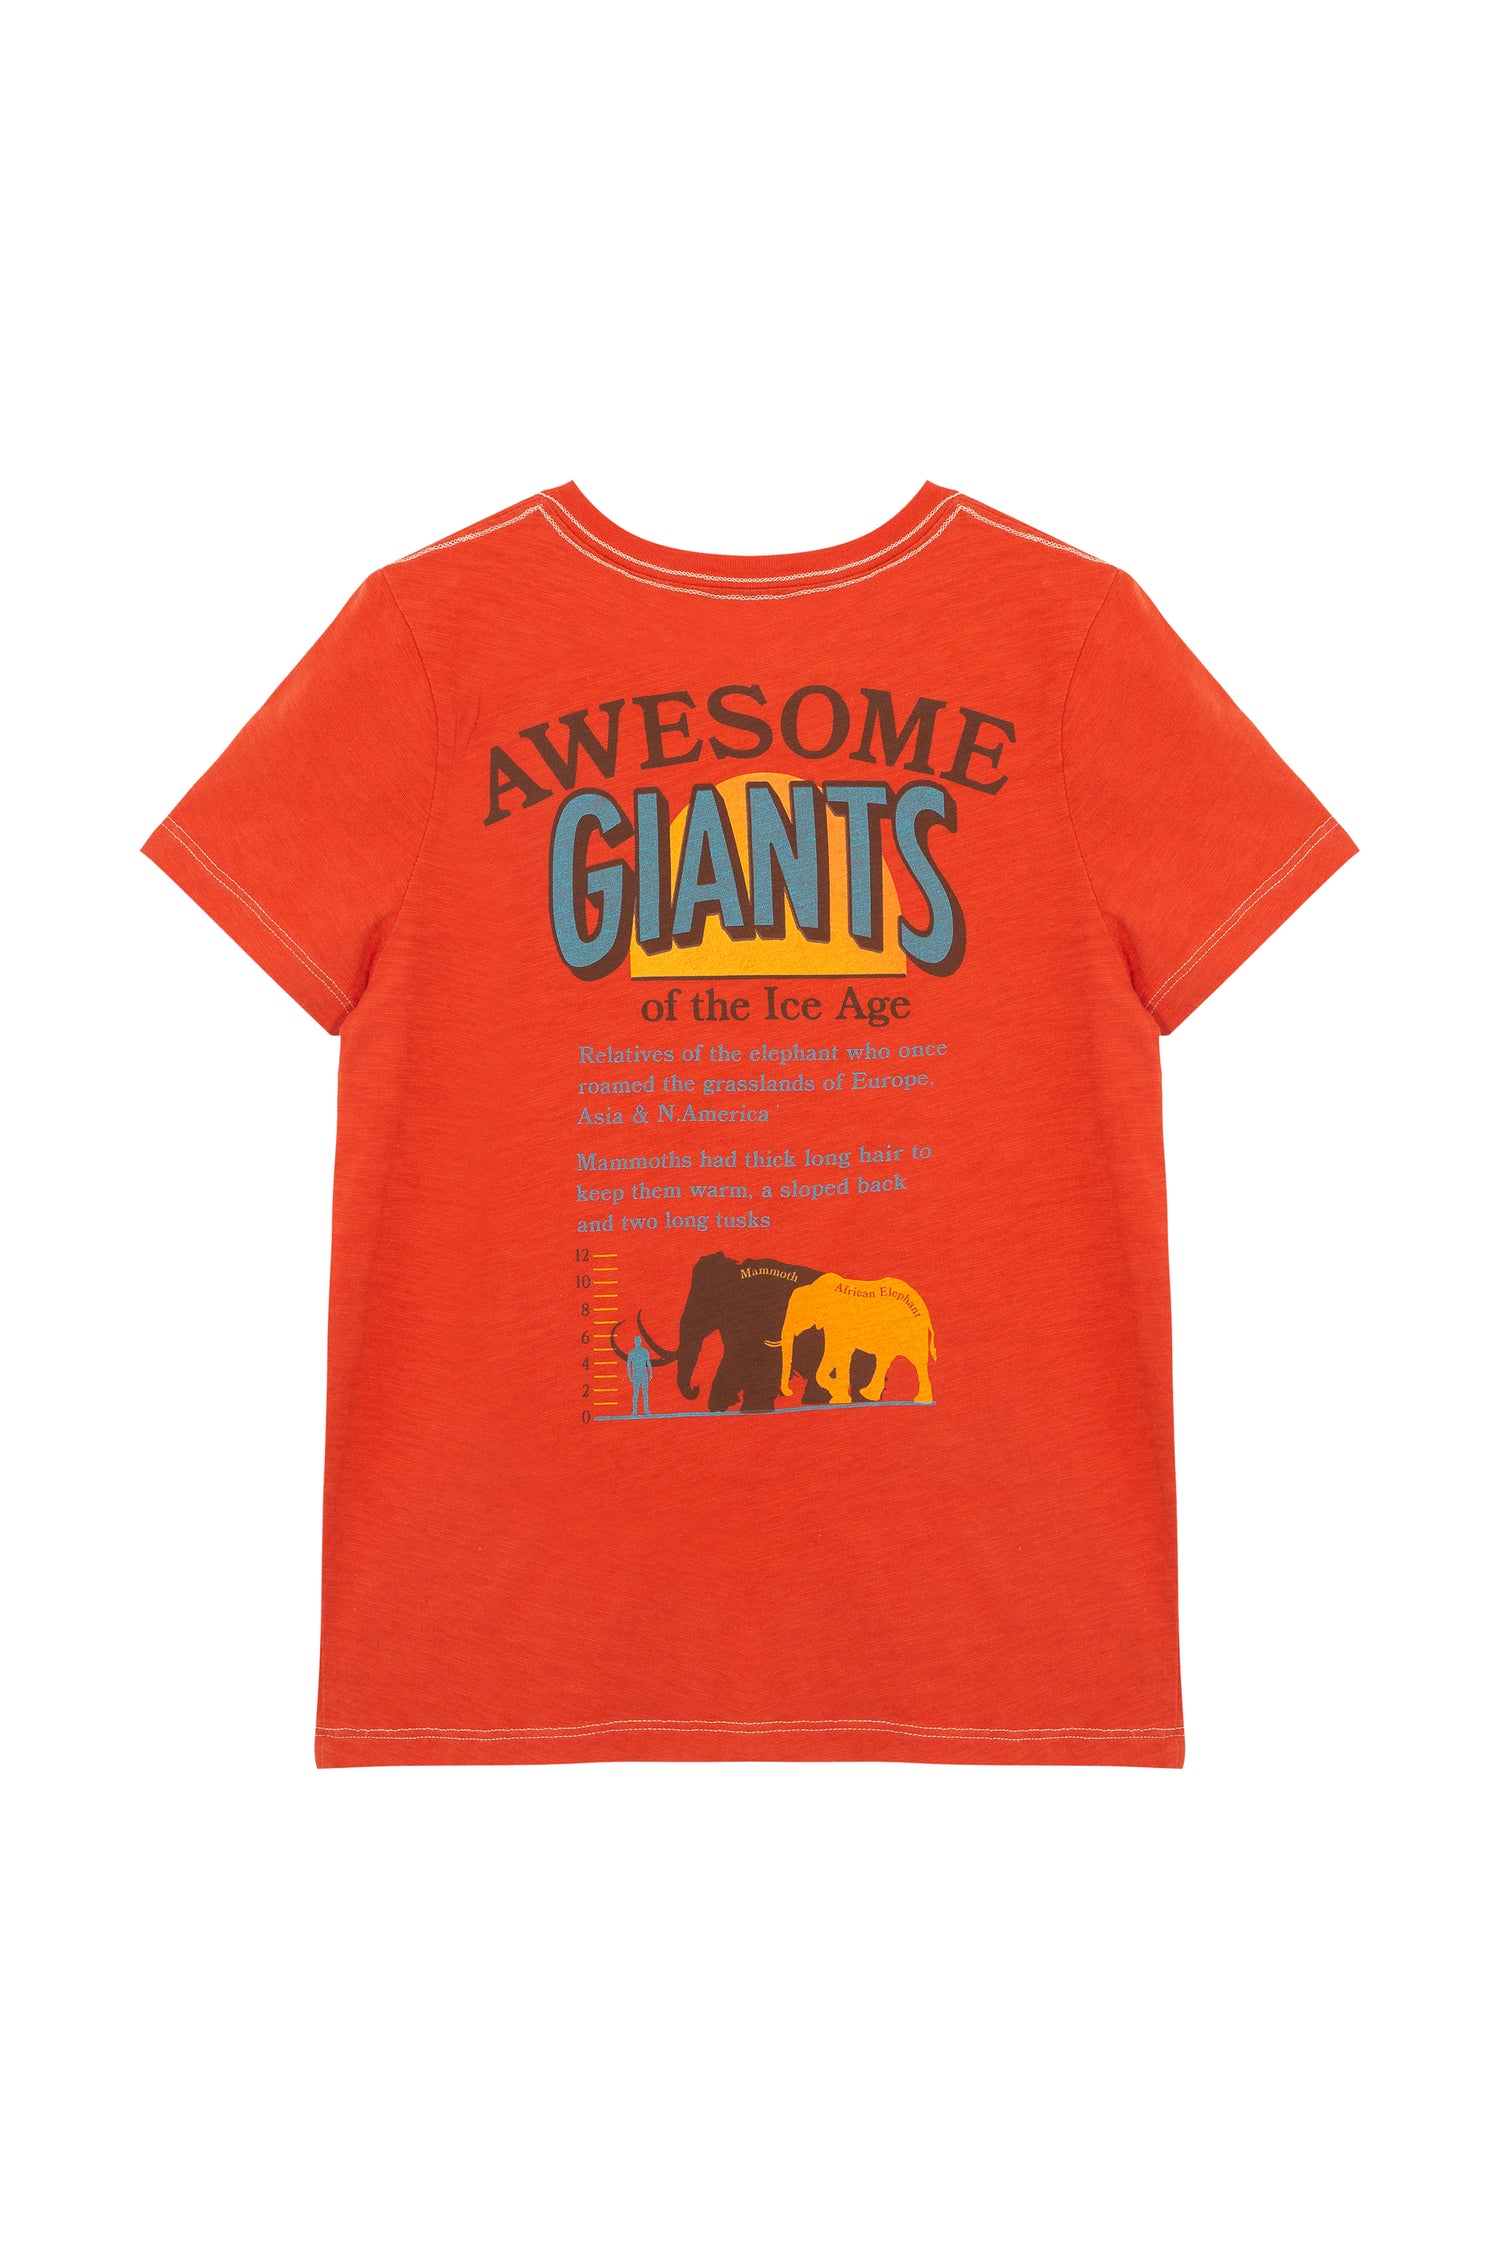 Back of red t-shirt with illustrations and text 'Giants of the Ice Age'